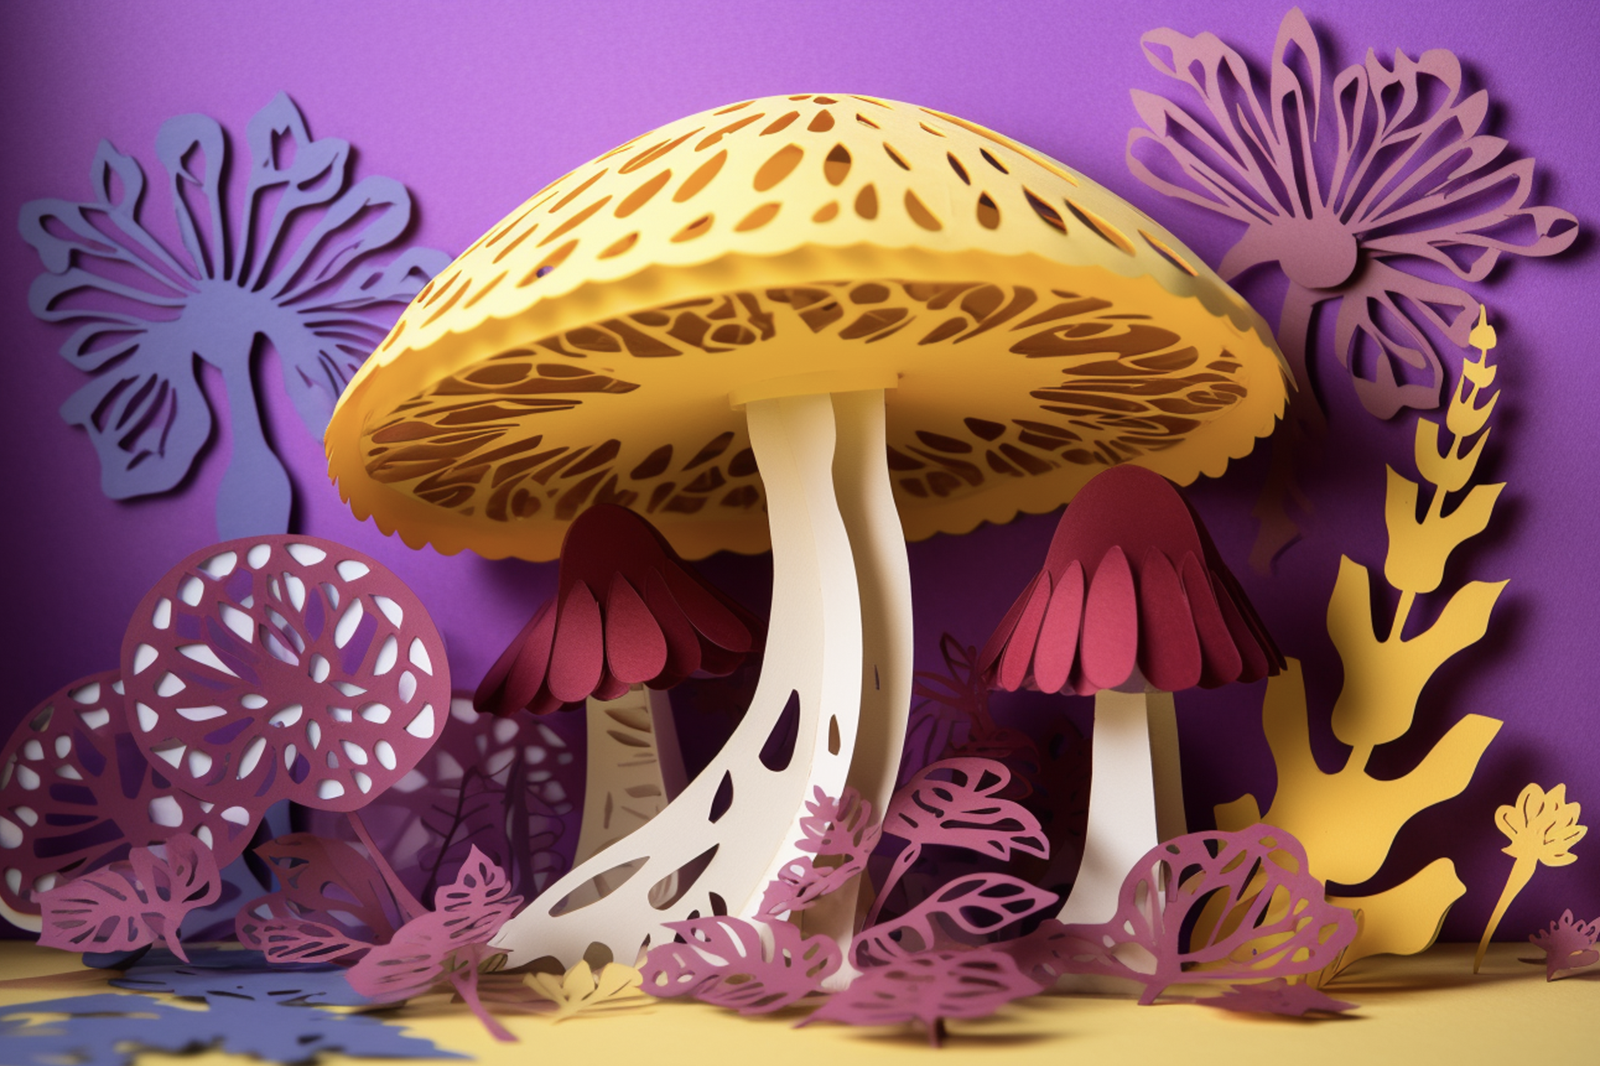 Large yellow 3D paper mushroom with small pink mushrooms and colorful leaf on purple background